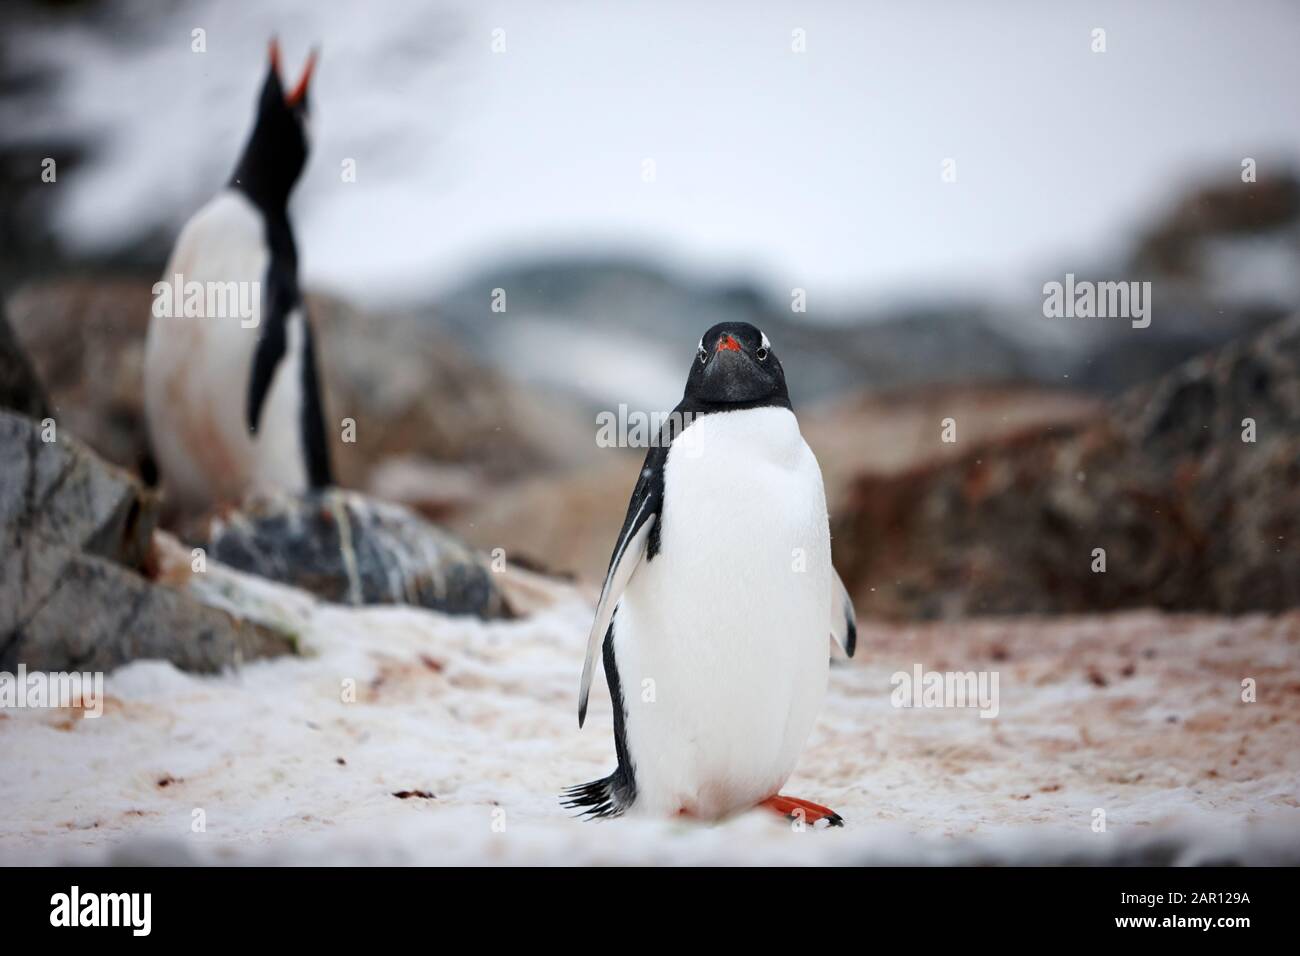 Gentoo penguin Pygoscelis papua Cuverville island Antarctica standing in dirty snow caused by penguin colony Stock Photo